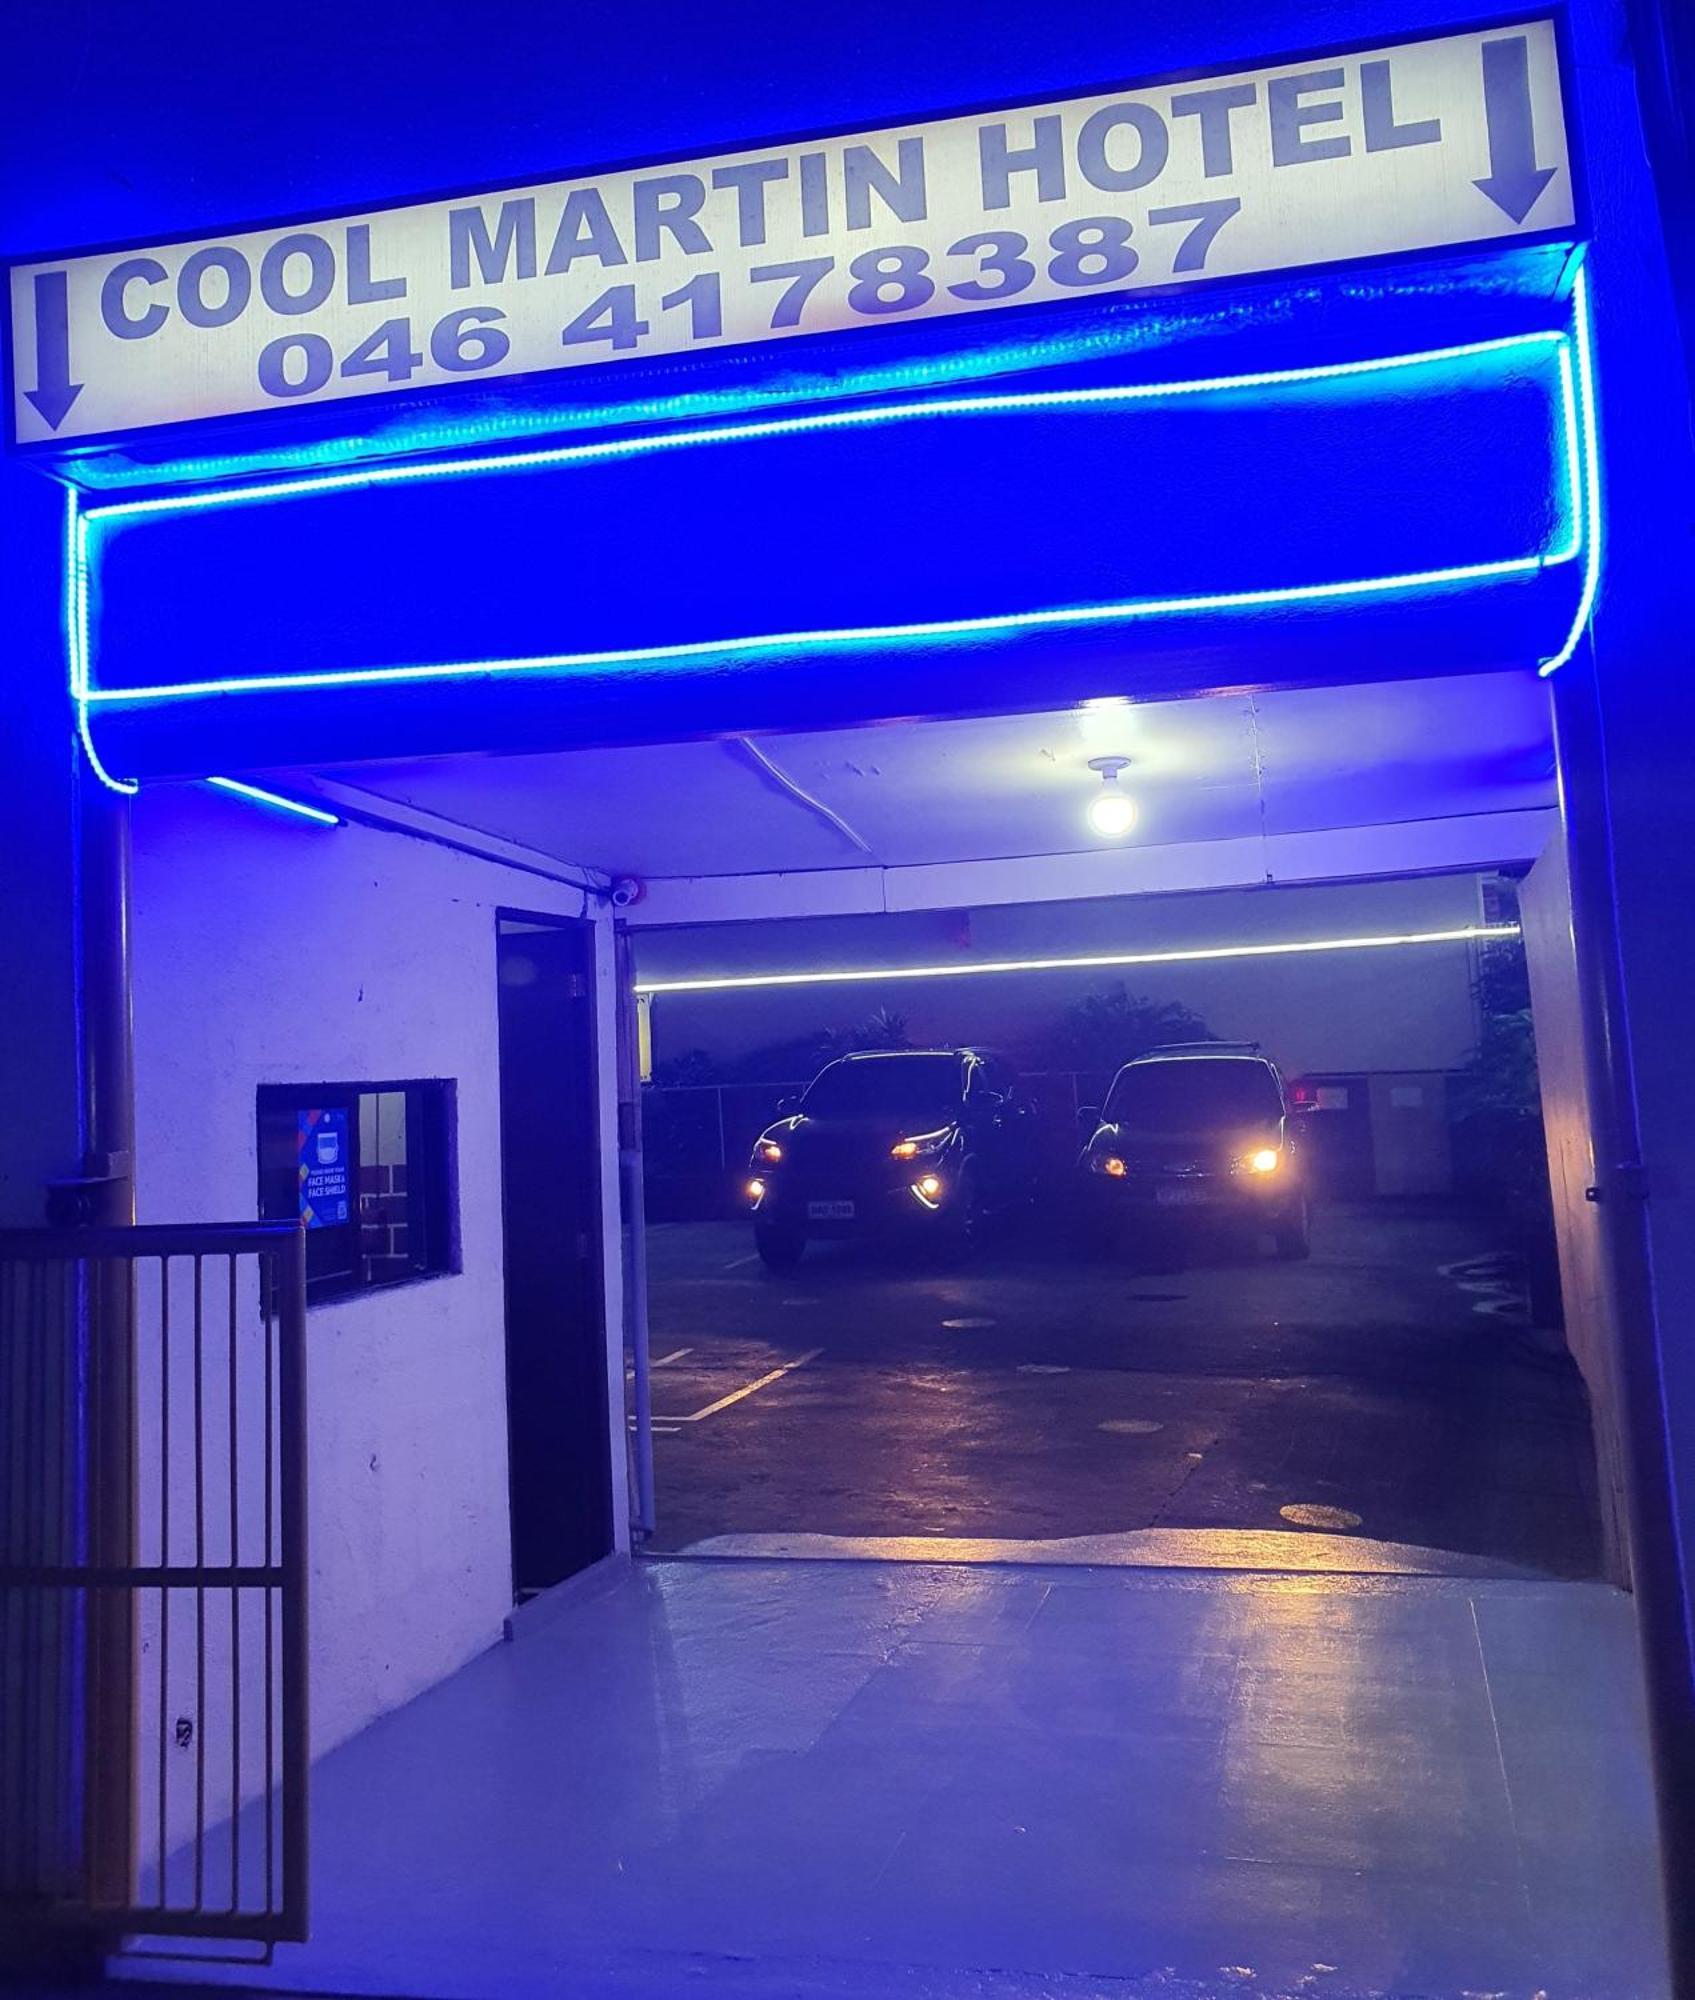 Cool Martin Family Hotel And Resort Bacoor Buitenkant foto